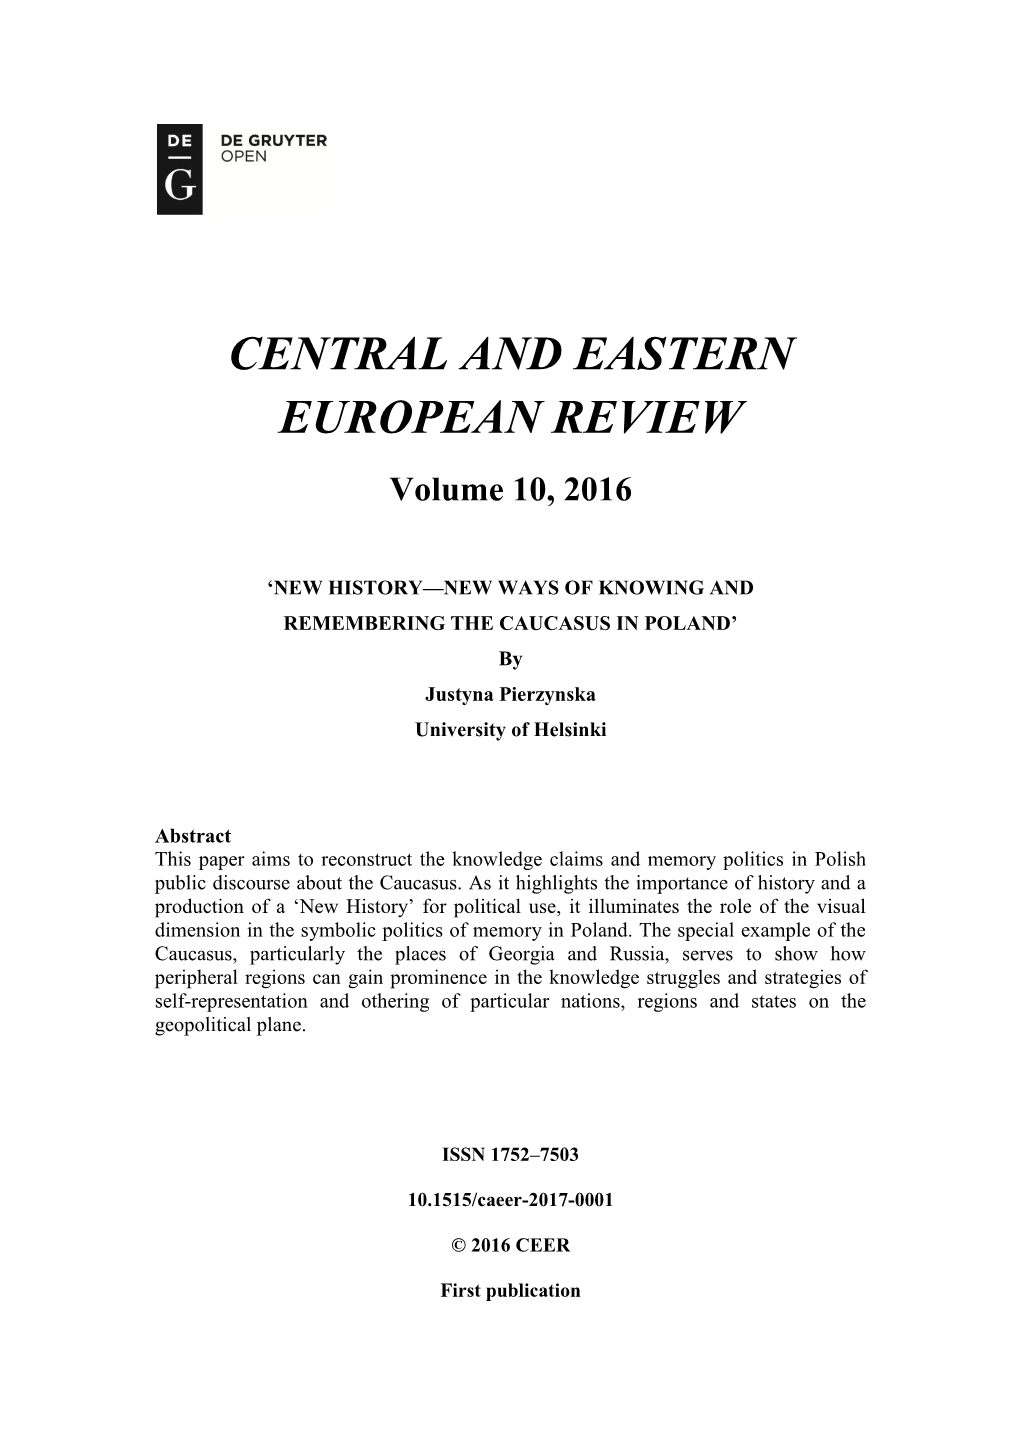 CENTRAL and EASTERN EUROPEAN REVIEW Volume 10, 2016